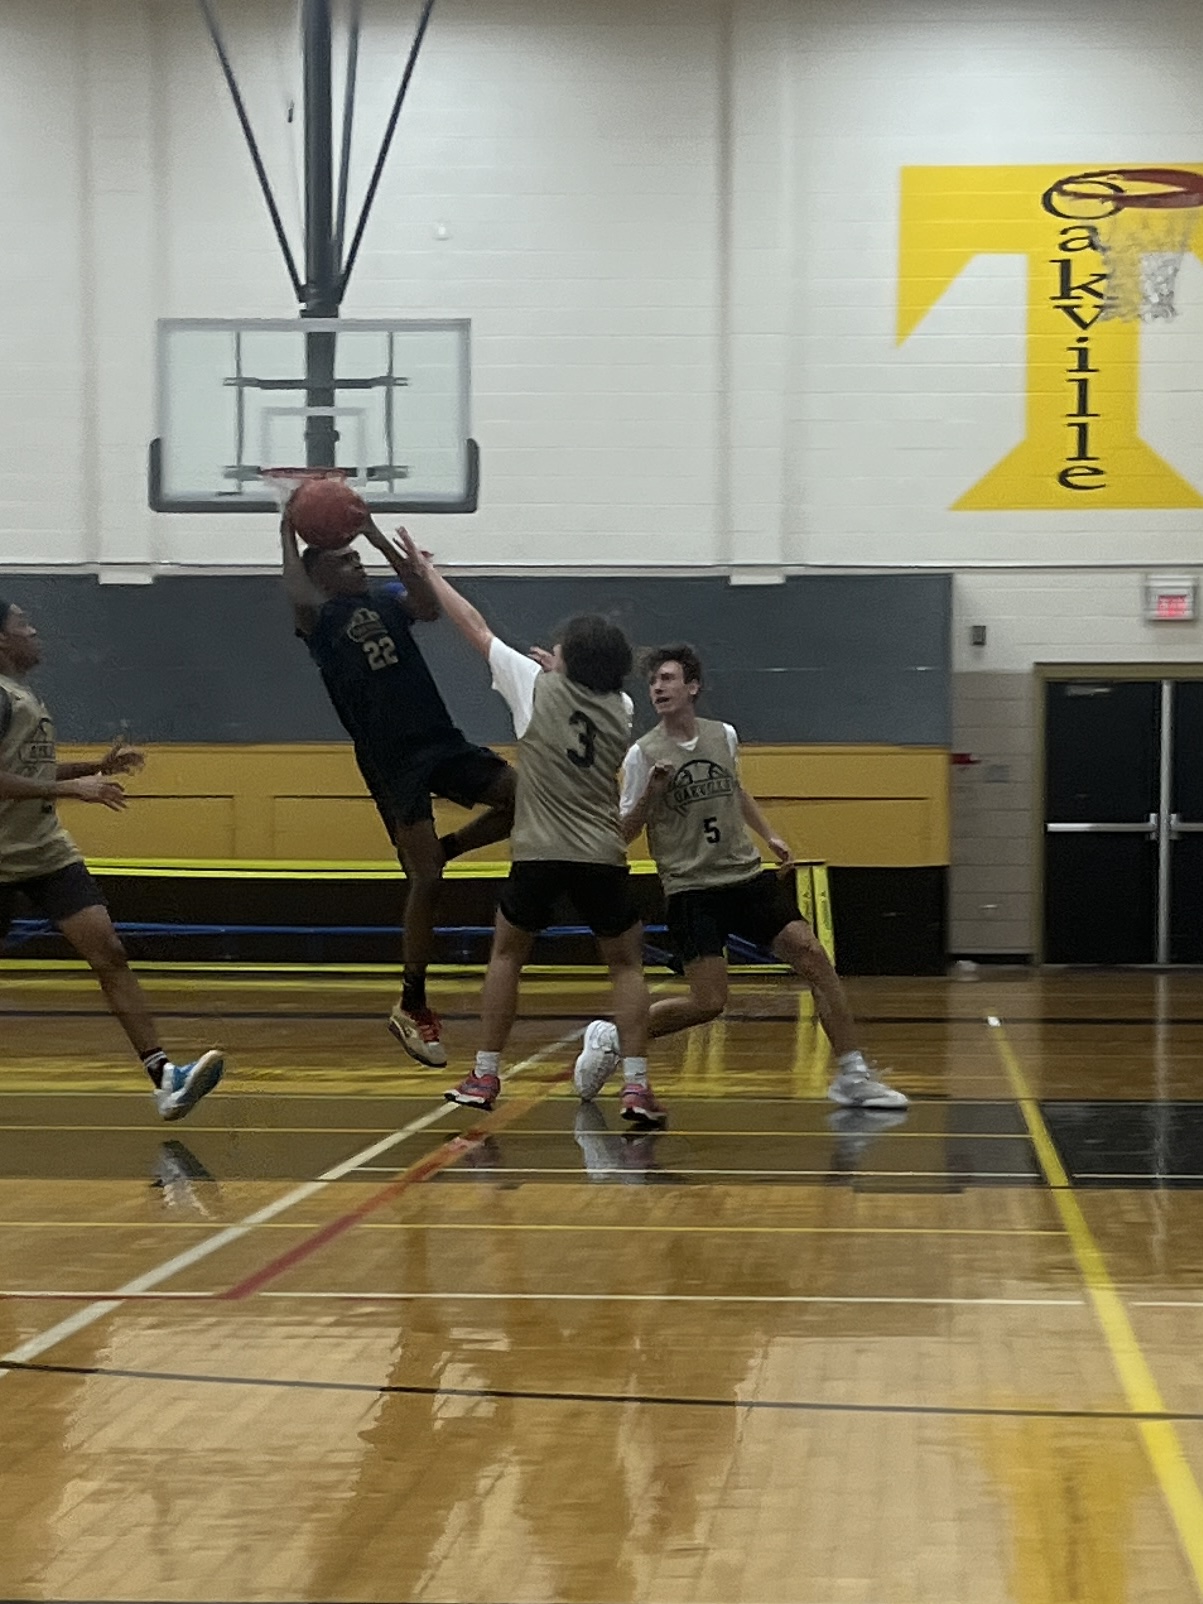 Darnel McDonald (11) goes up to make a shot during a scrimmage in practice. “I am pretty excited about the season,” McDonald said. “I am ready to win some games.” McDonald has had varsity basketball experience since his freshman year.